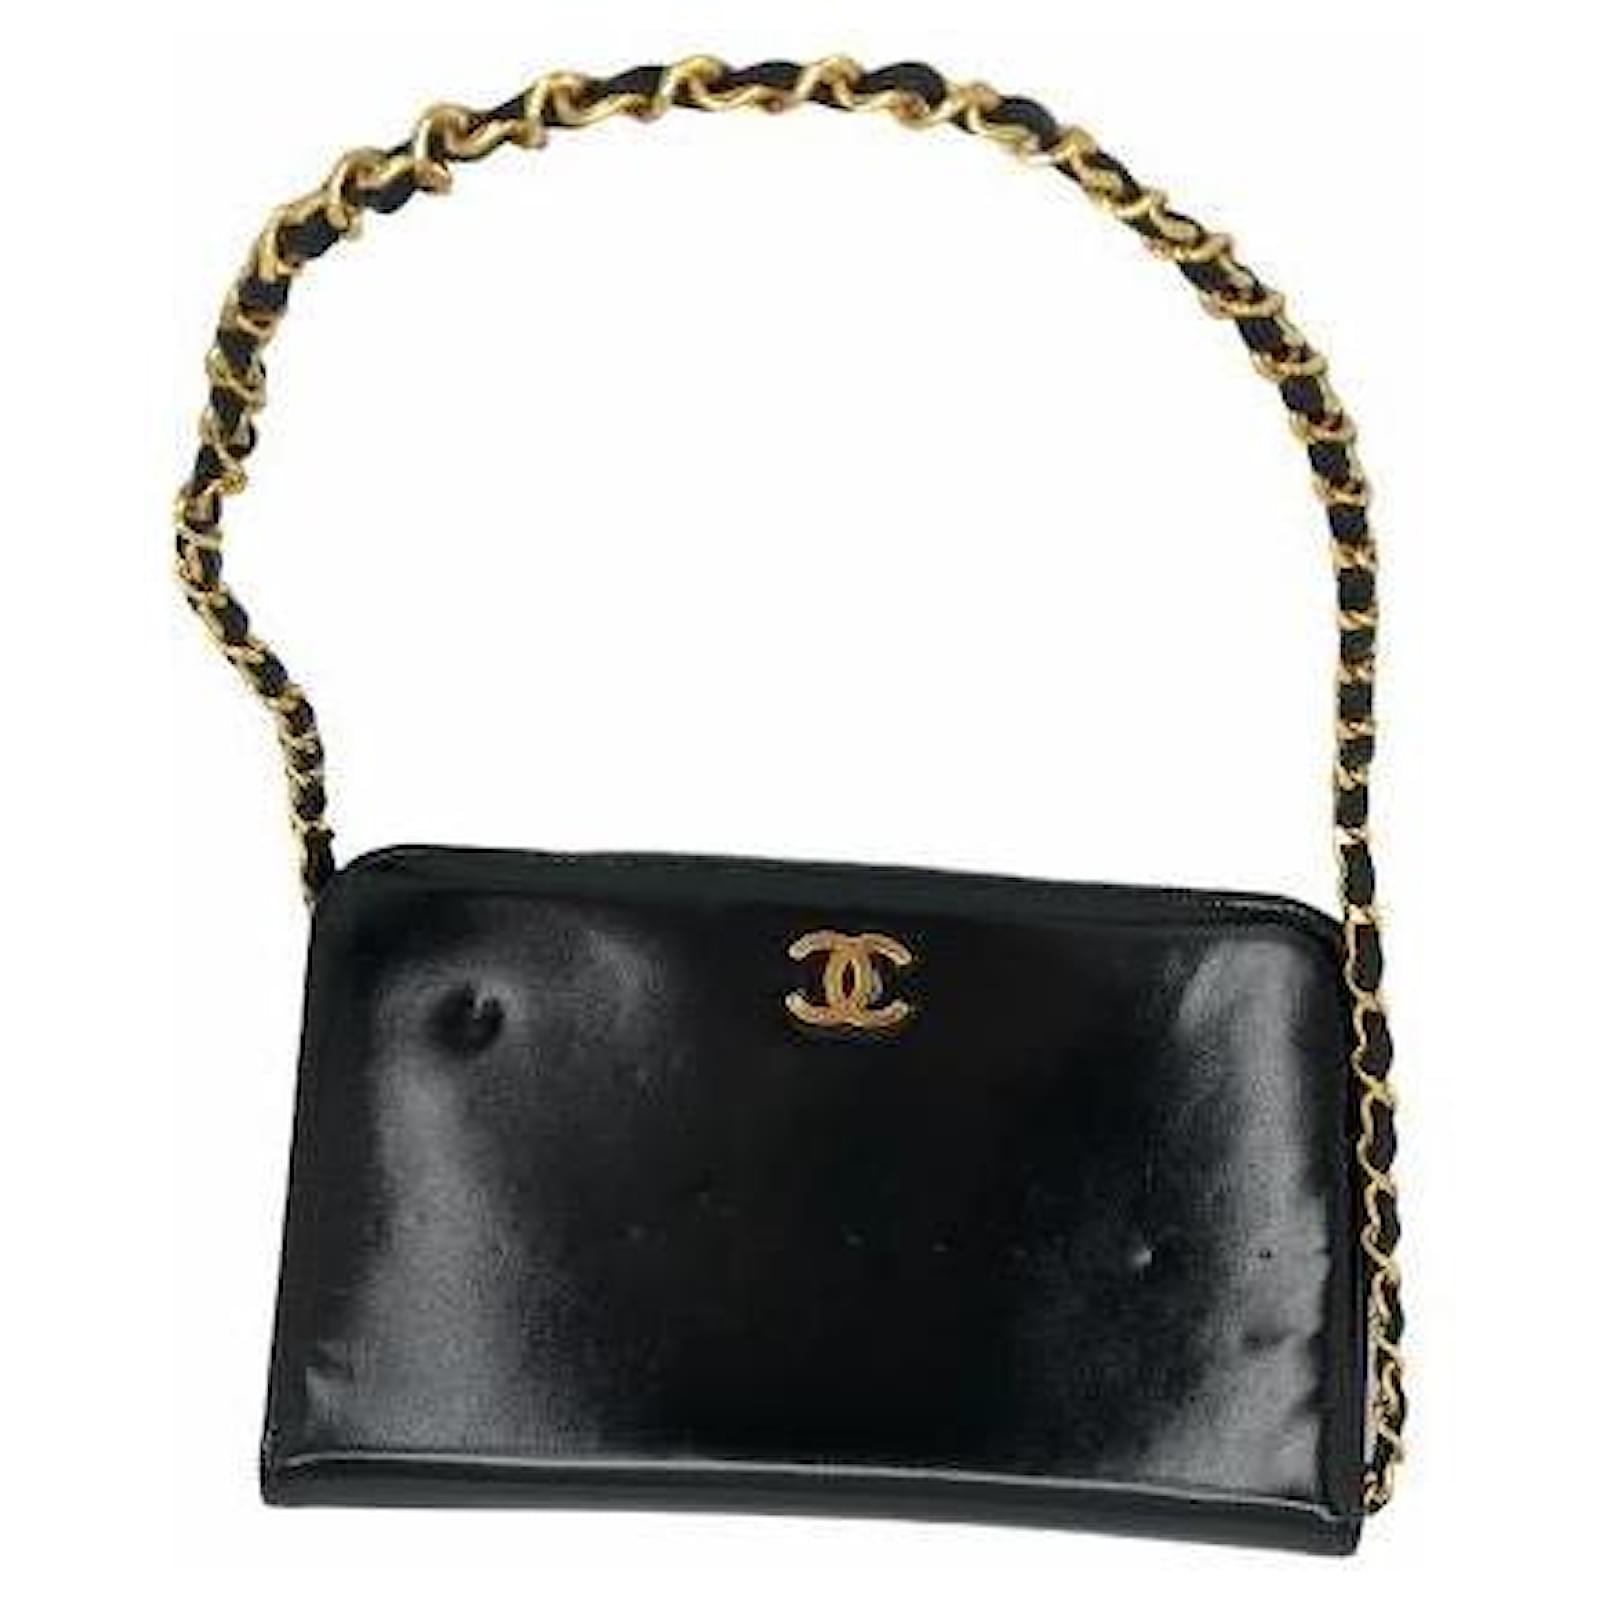 Used chanel chain wallet - Gem